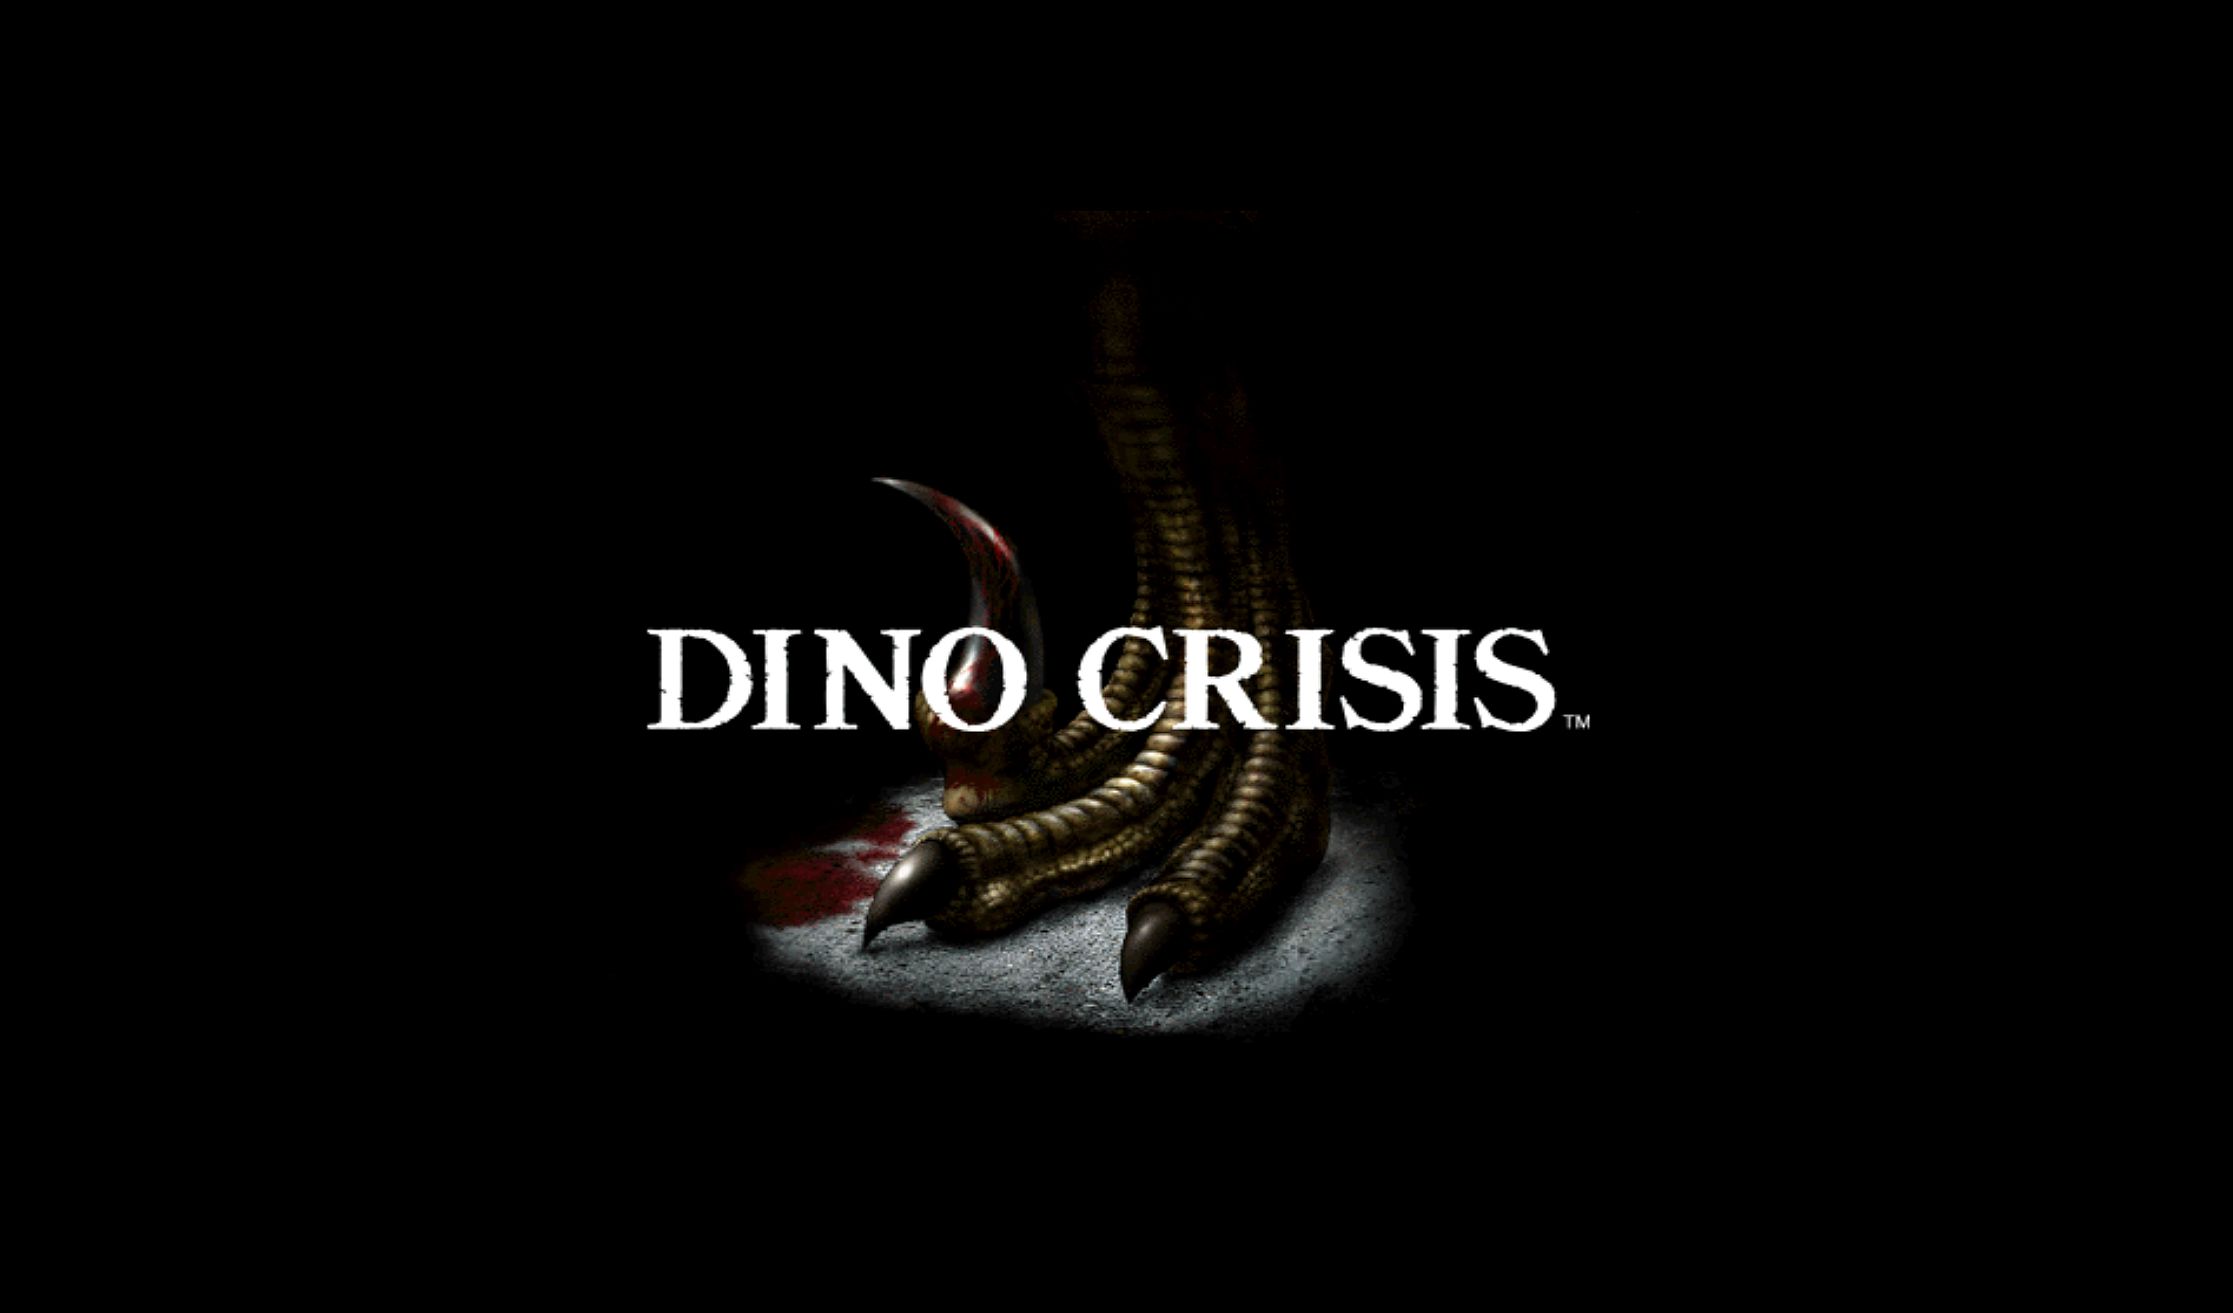 Image for Looks like Dino Crisis may be coming to the PlayStation Plus Classics catalog